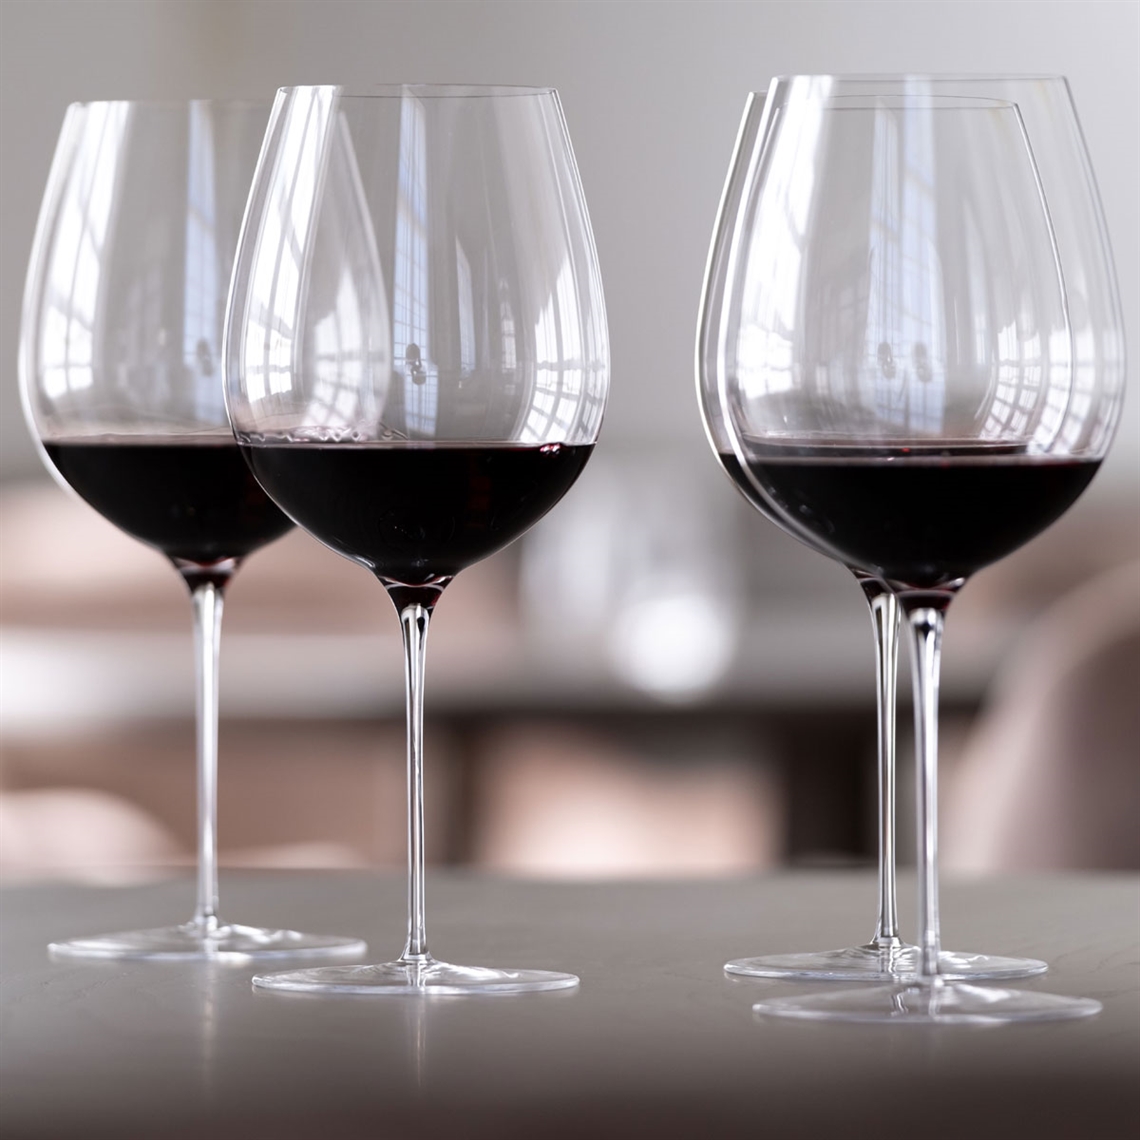 Sydonios Terroir Collection - Le Méridional Red Wine Glass - Set of 6